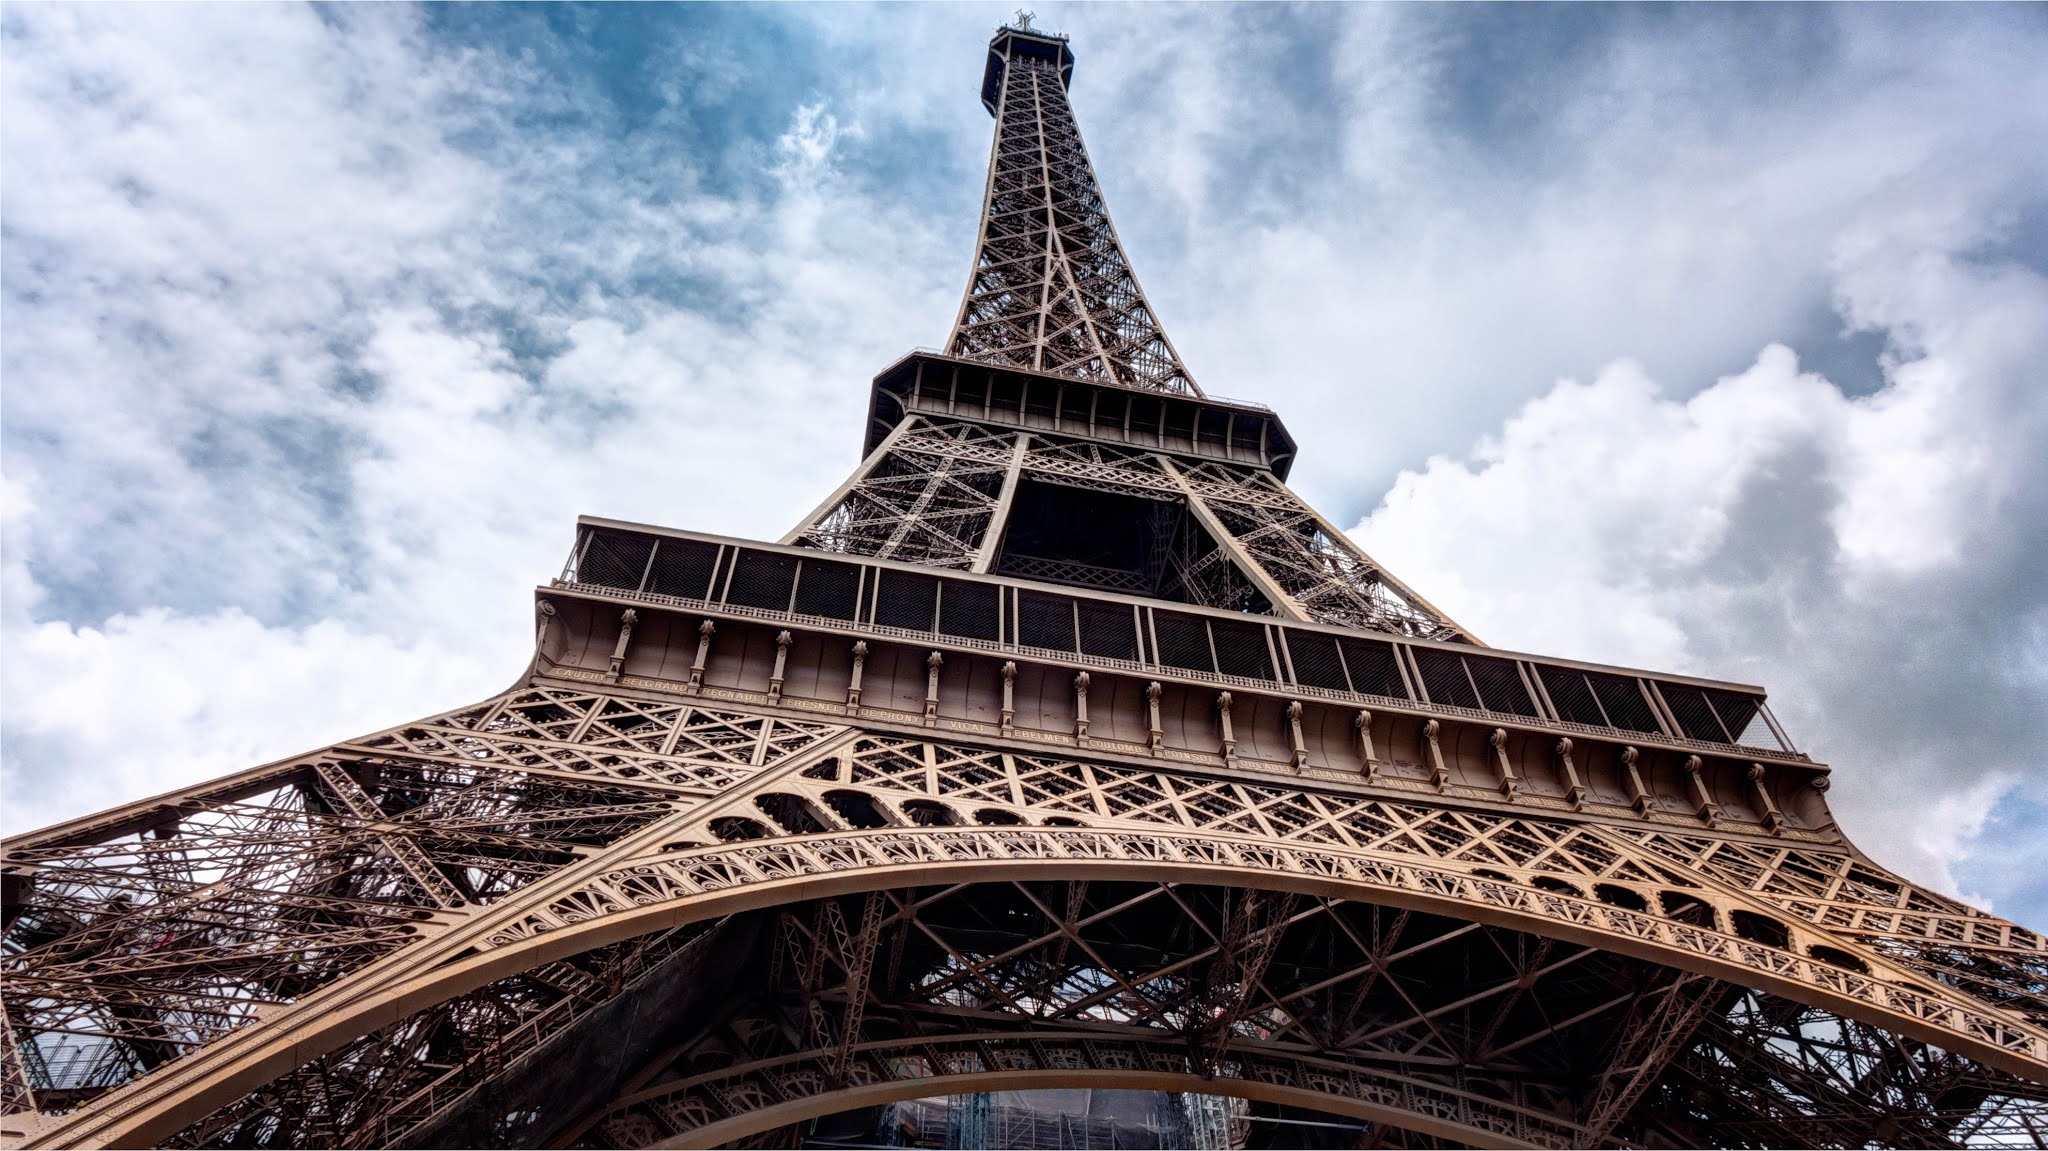 Top 5 Interesting Facts You Should Know About The Eiffel Tower